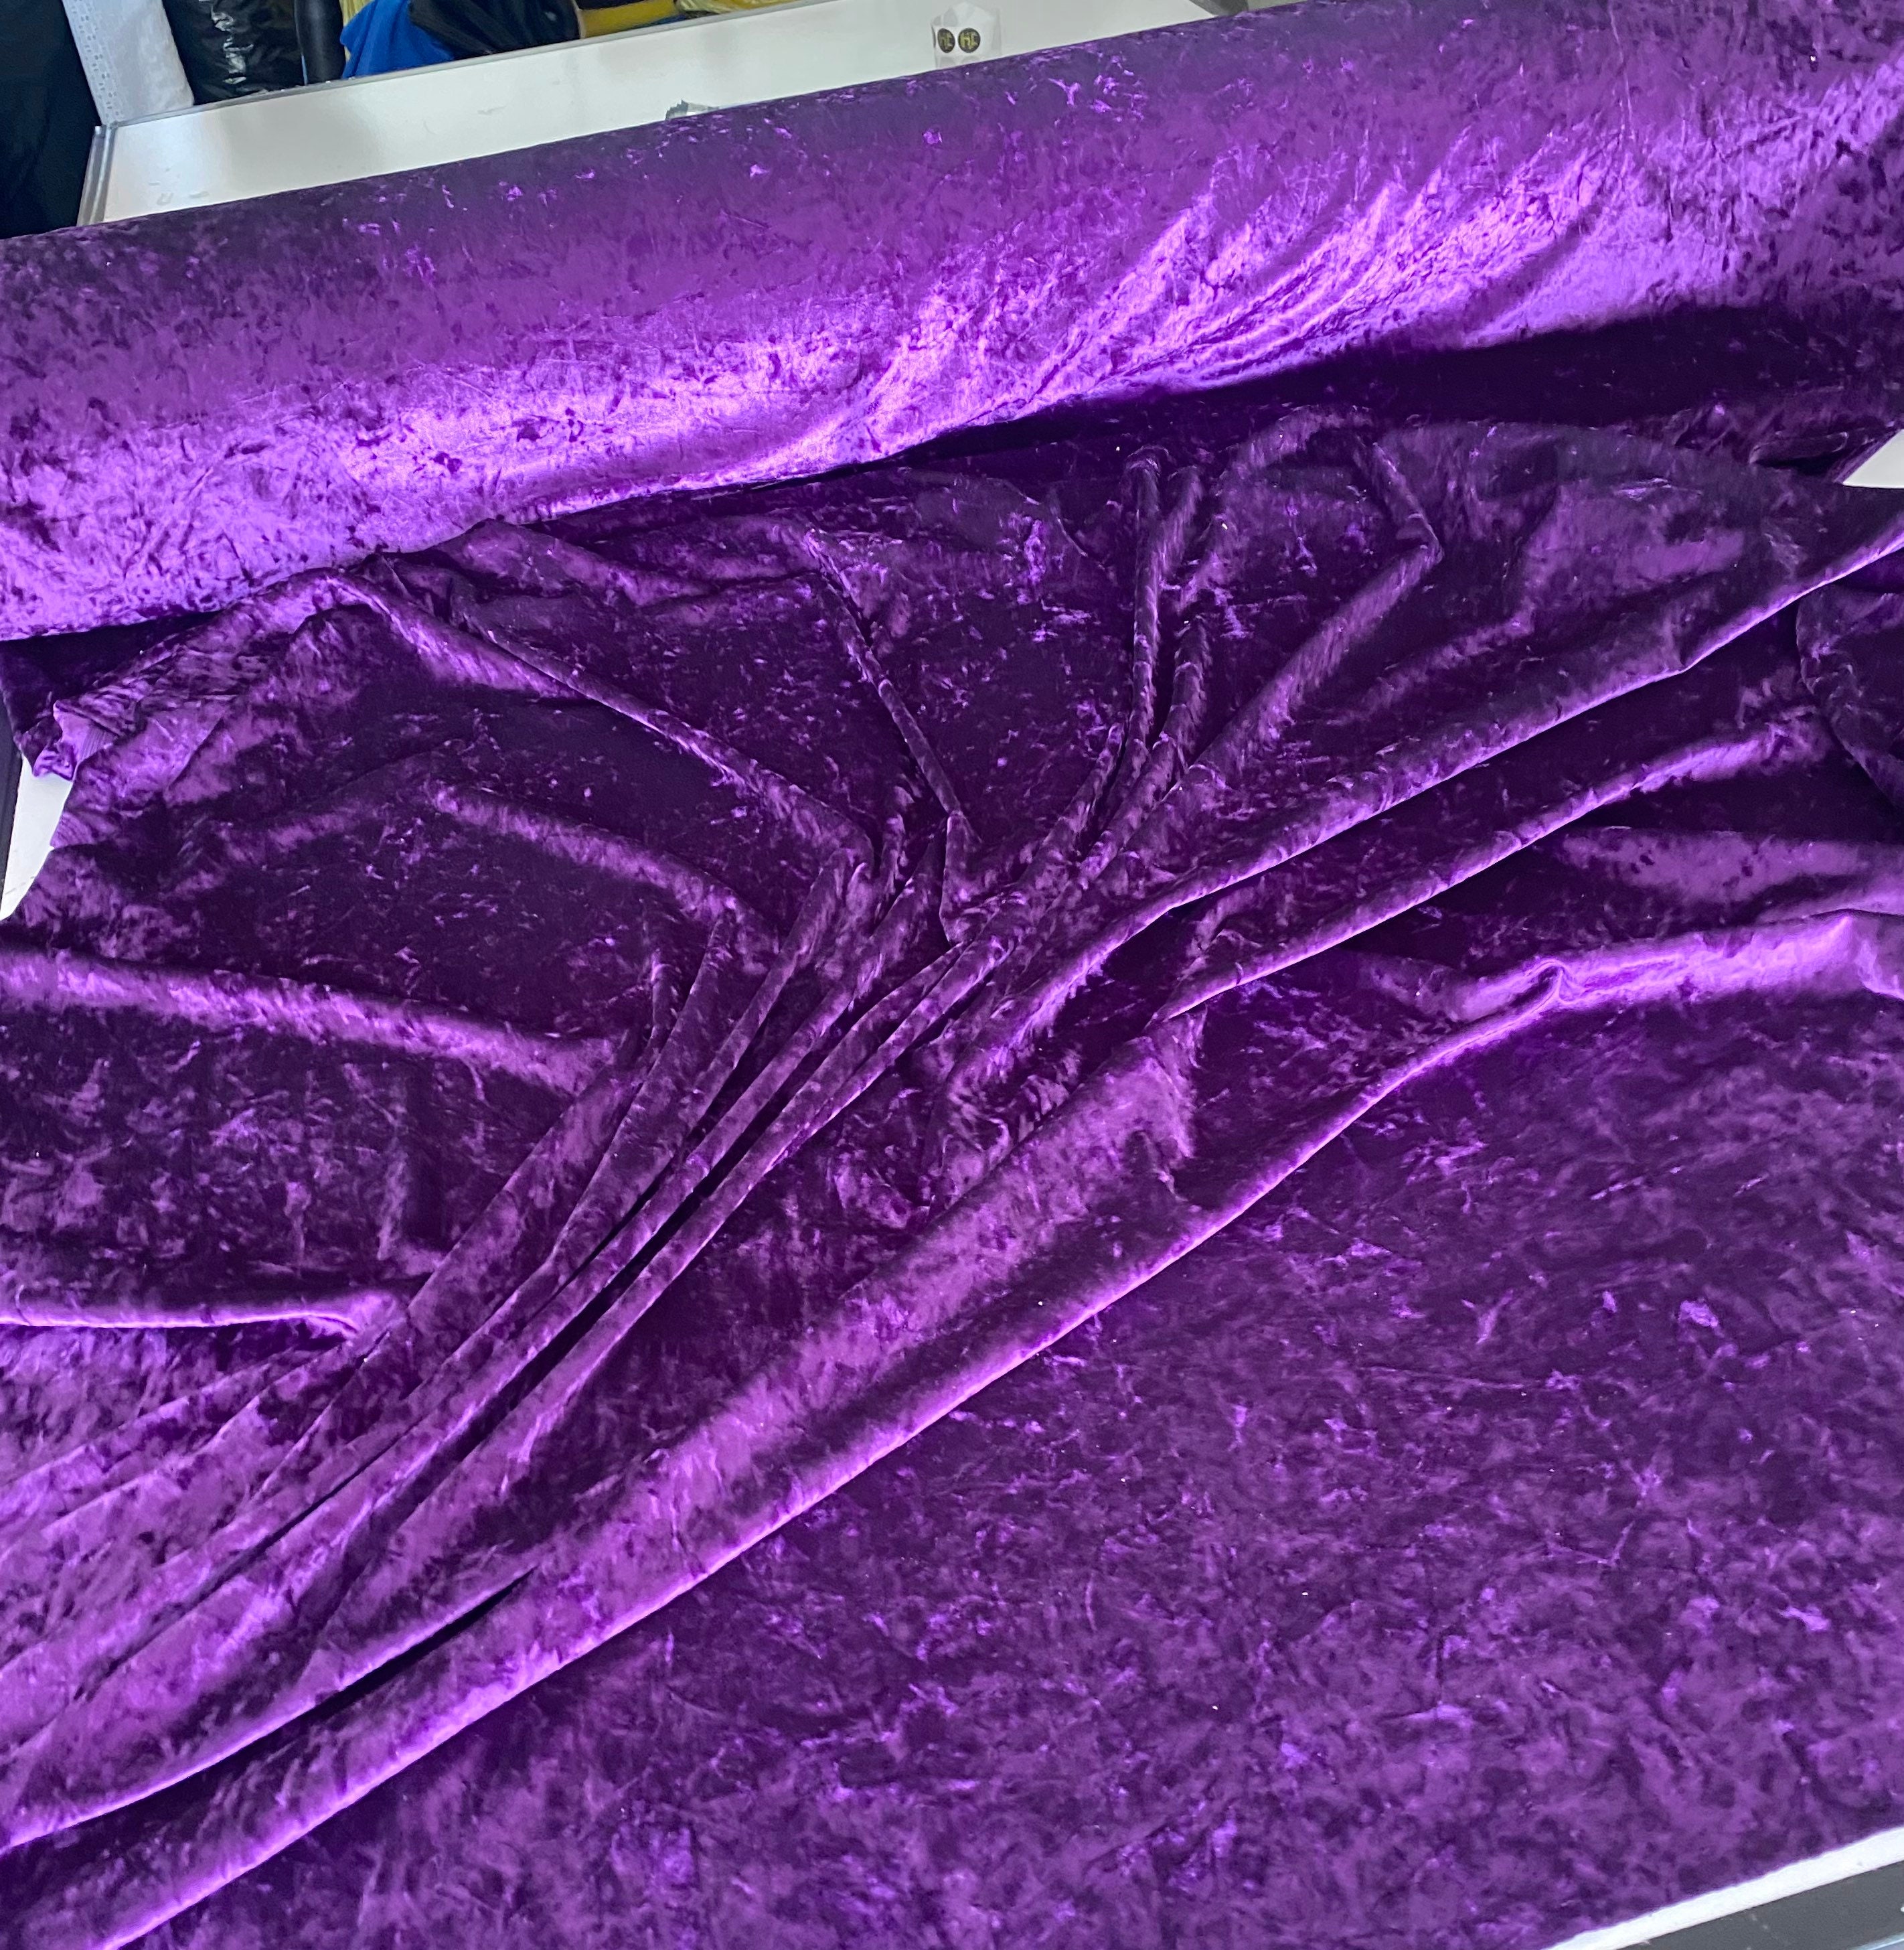 Purple Classic Crushed Velvet Upholstery Fabric By The Yard